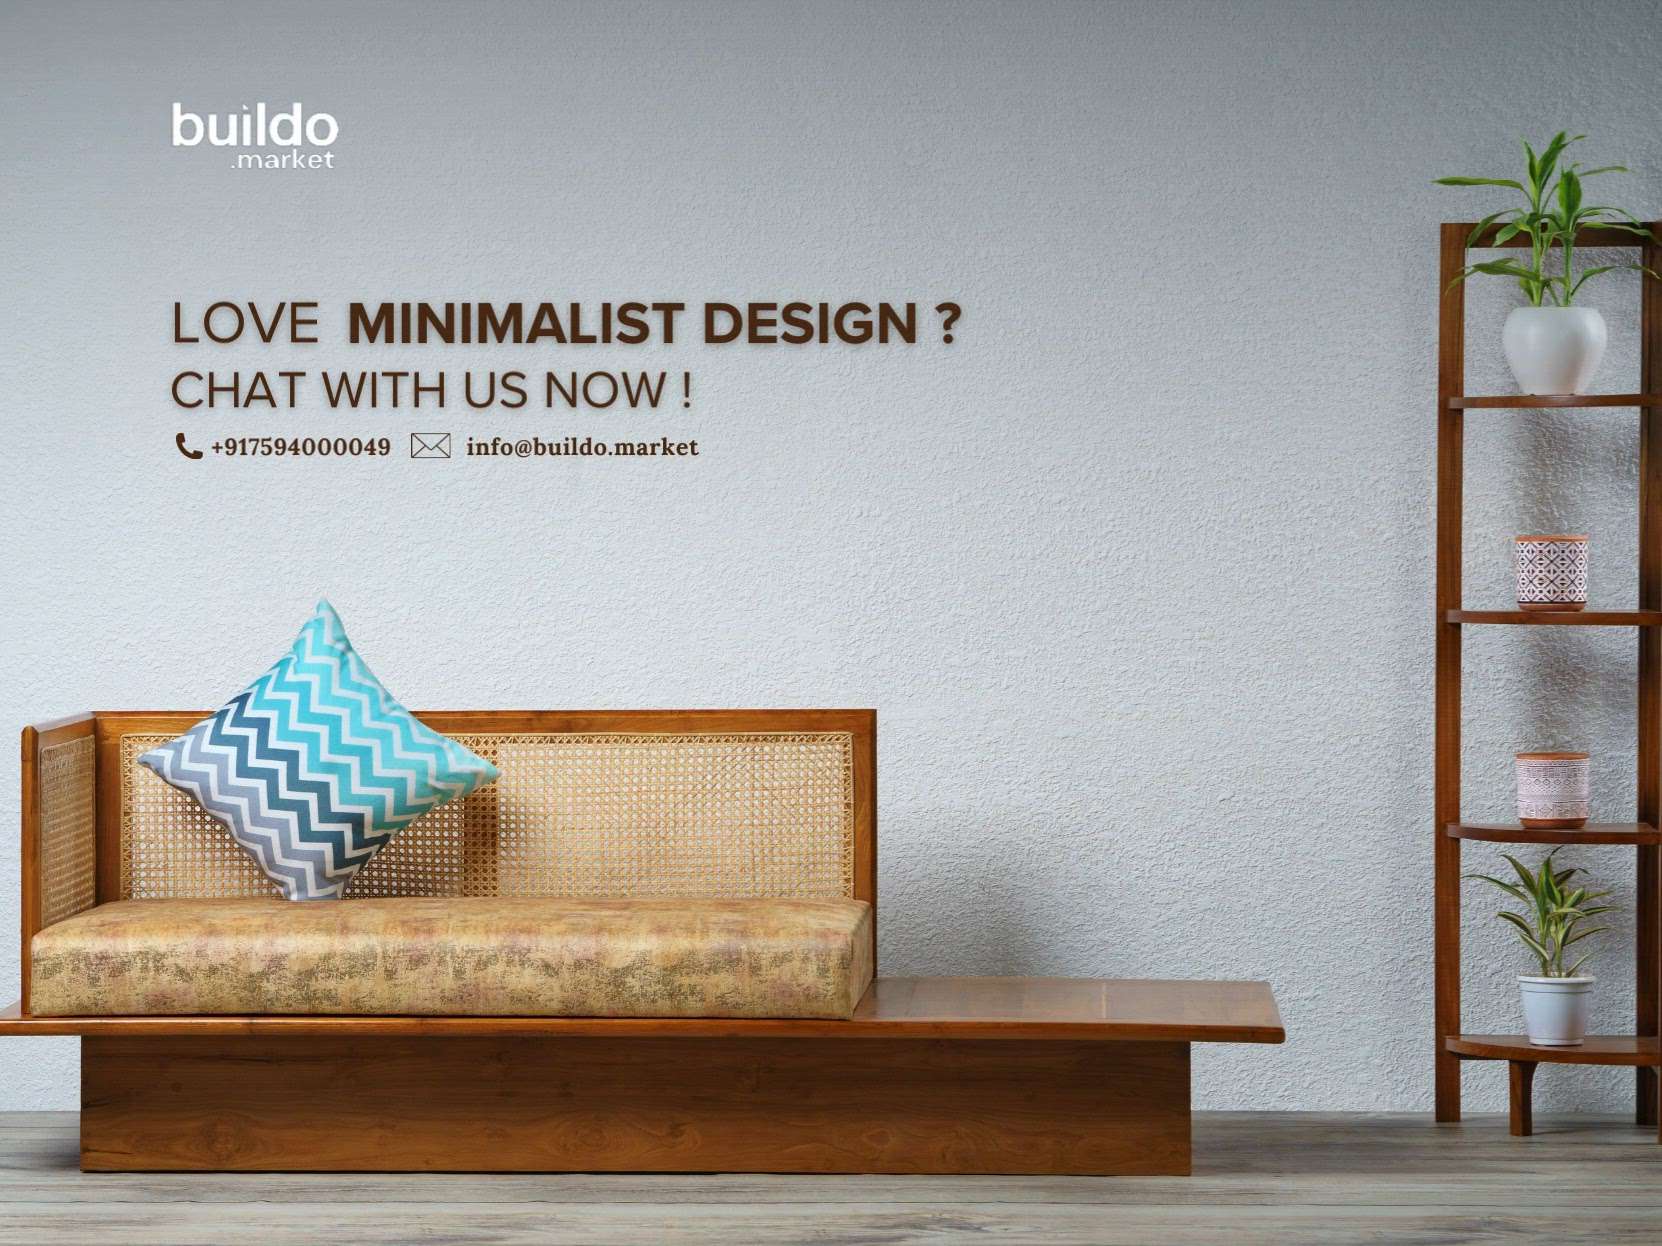 Contact Buildo.market for product inquiries and services!
https://koloapp.in/call/04954262365
 #InteriorDesigner #minimal #minimalinteriors #architecturedesigns #Woodenfurniture #furnitures